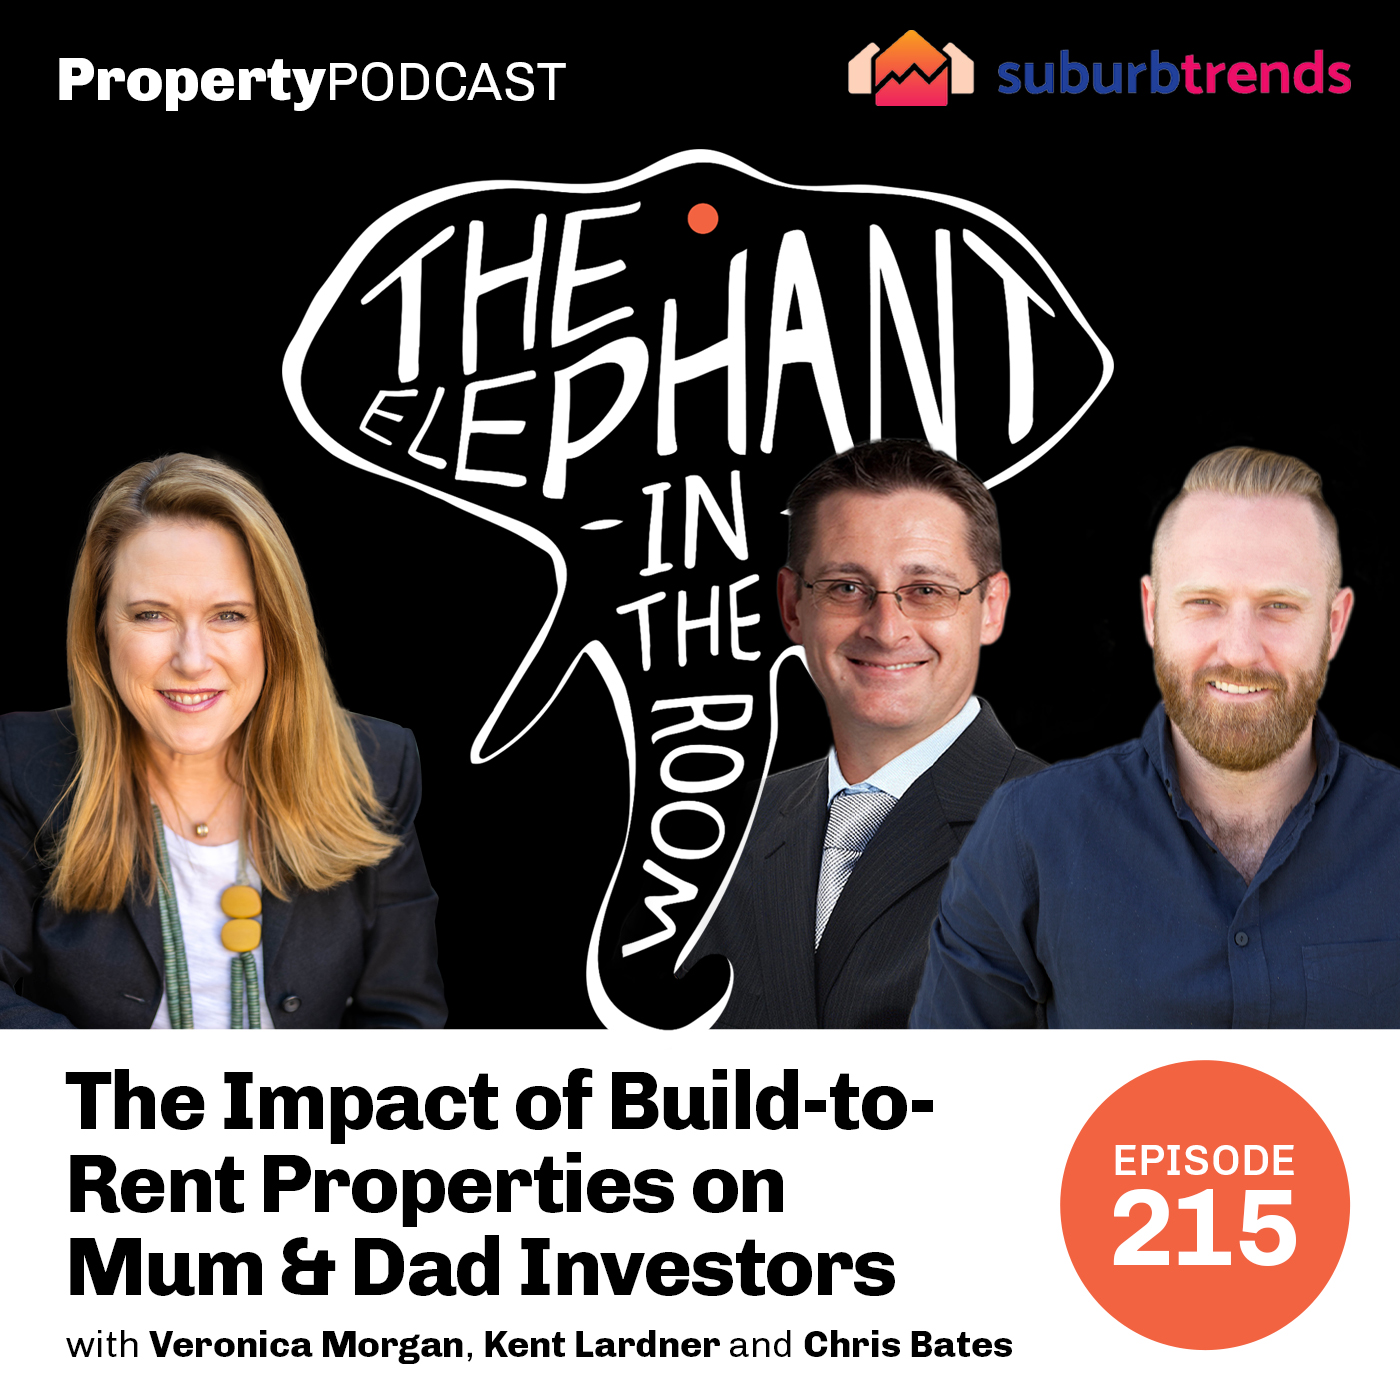 Suburb Trends February 2022 | The Impact of Build-to-Rent Properties on Mum & Dad Investors